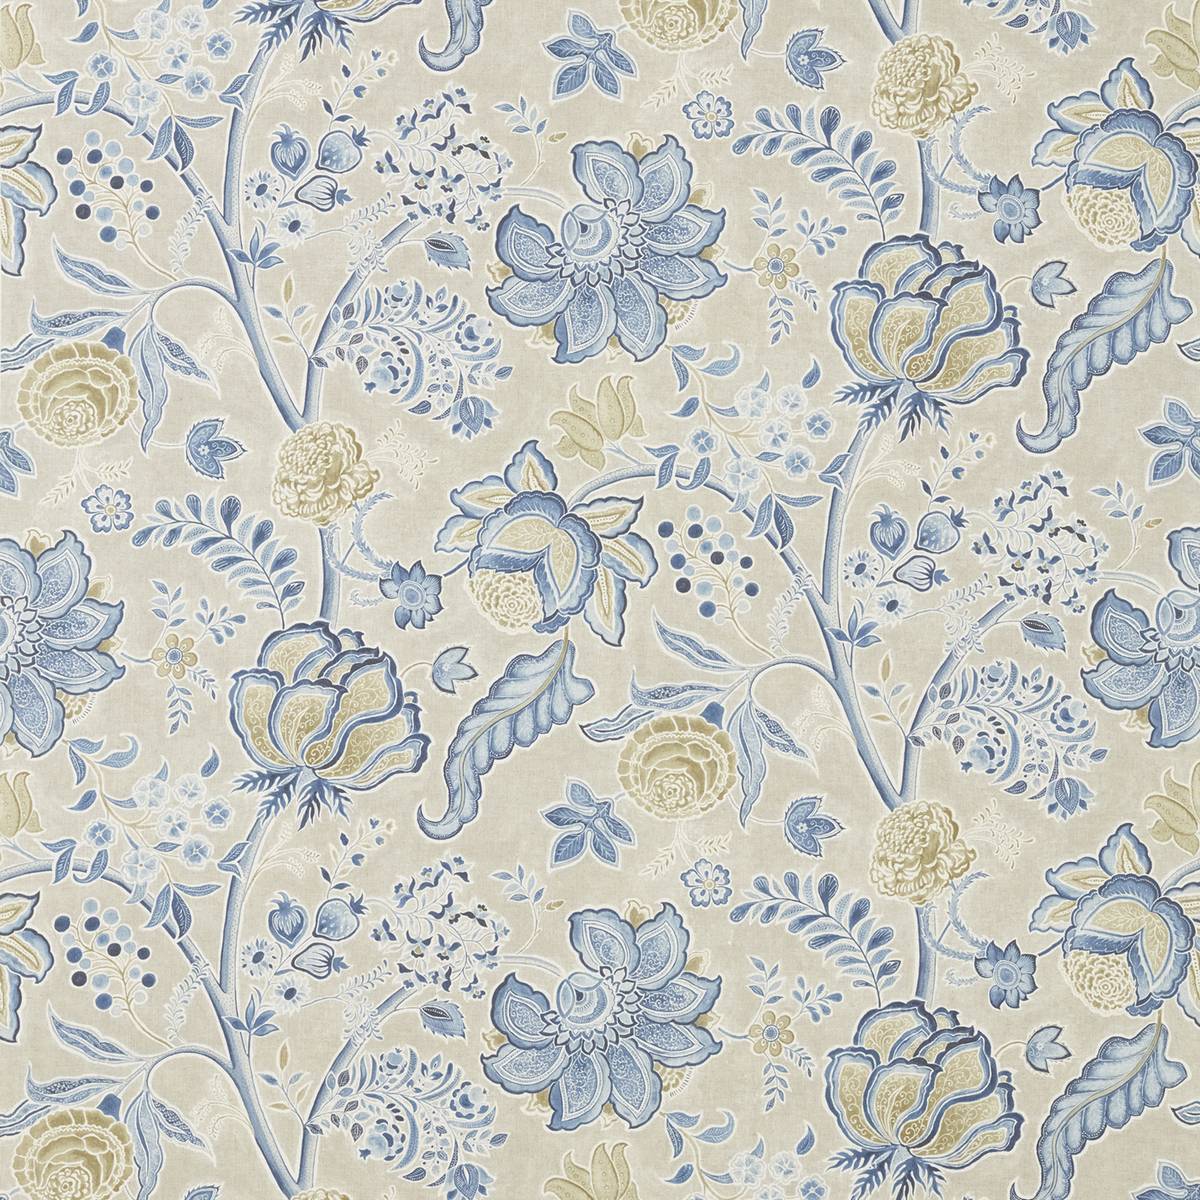 Shalimar China Blue/Linen Fabric by Sanderson